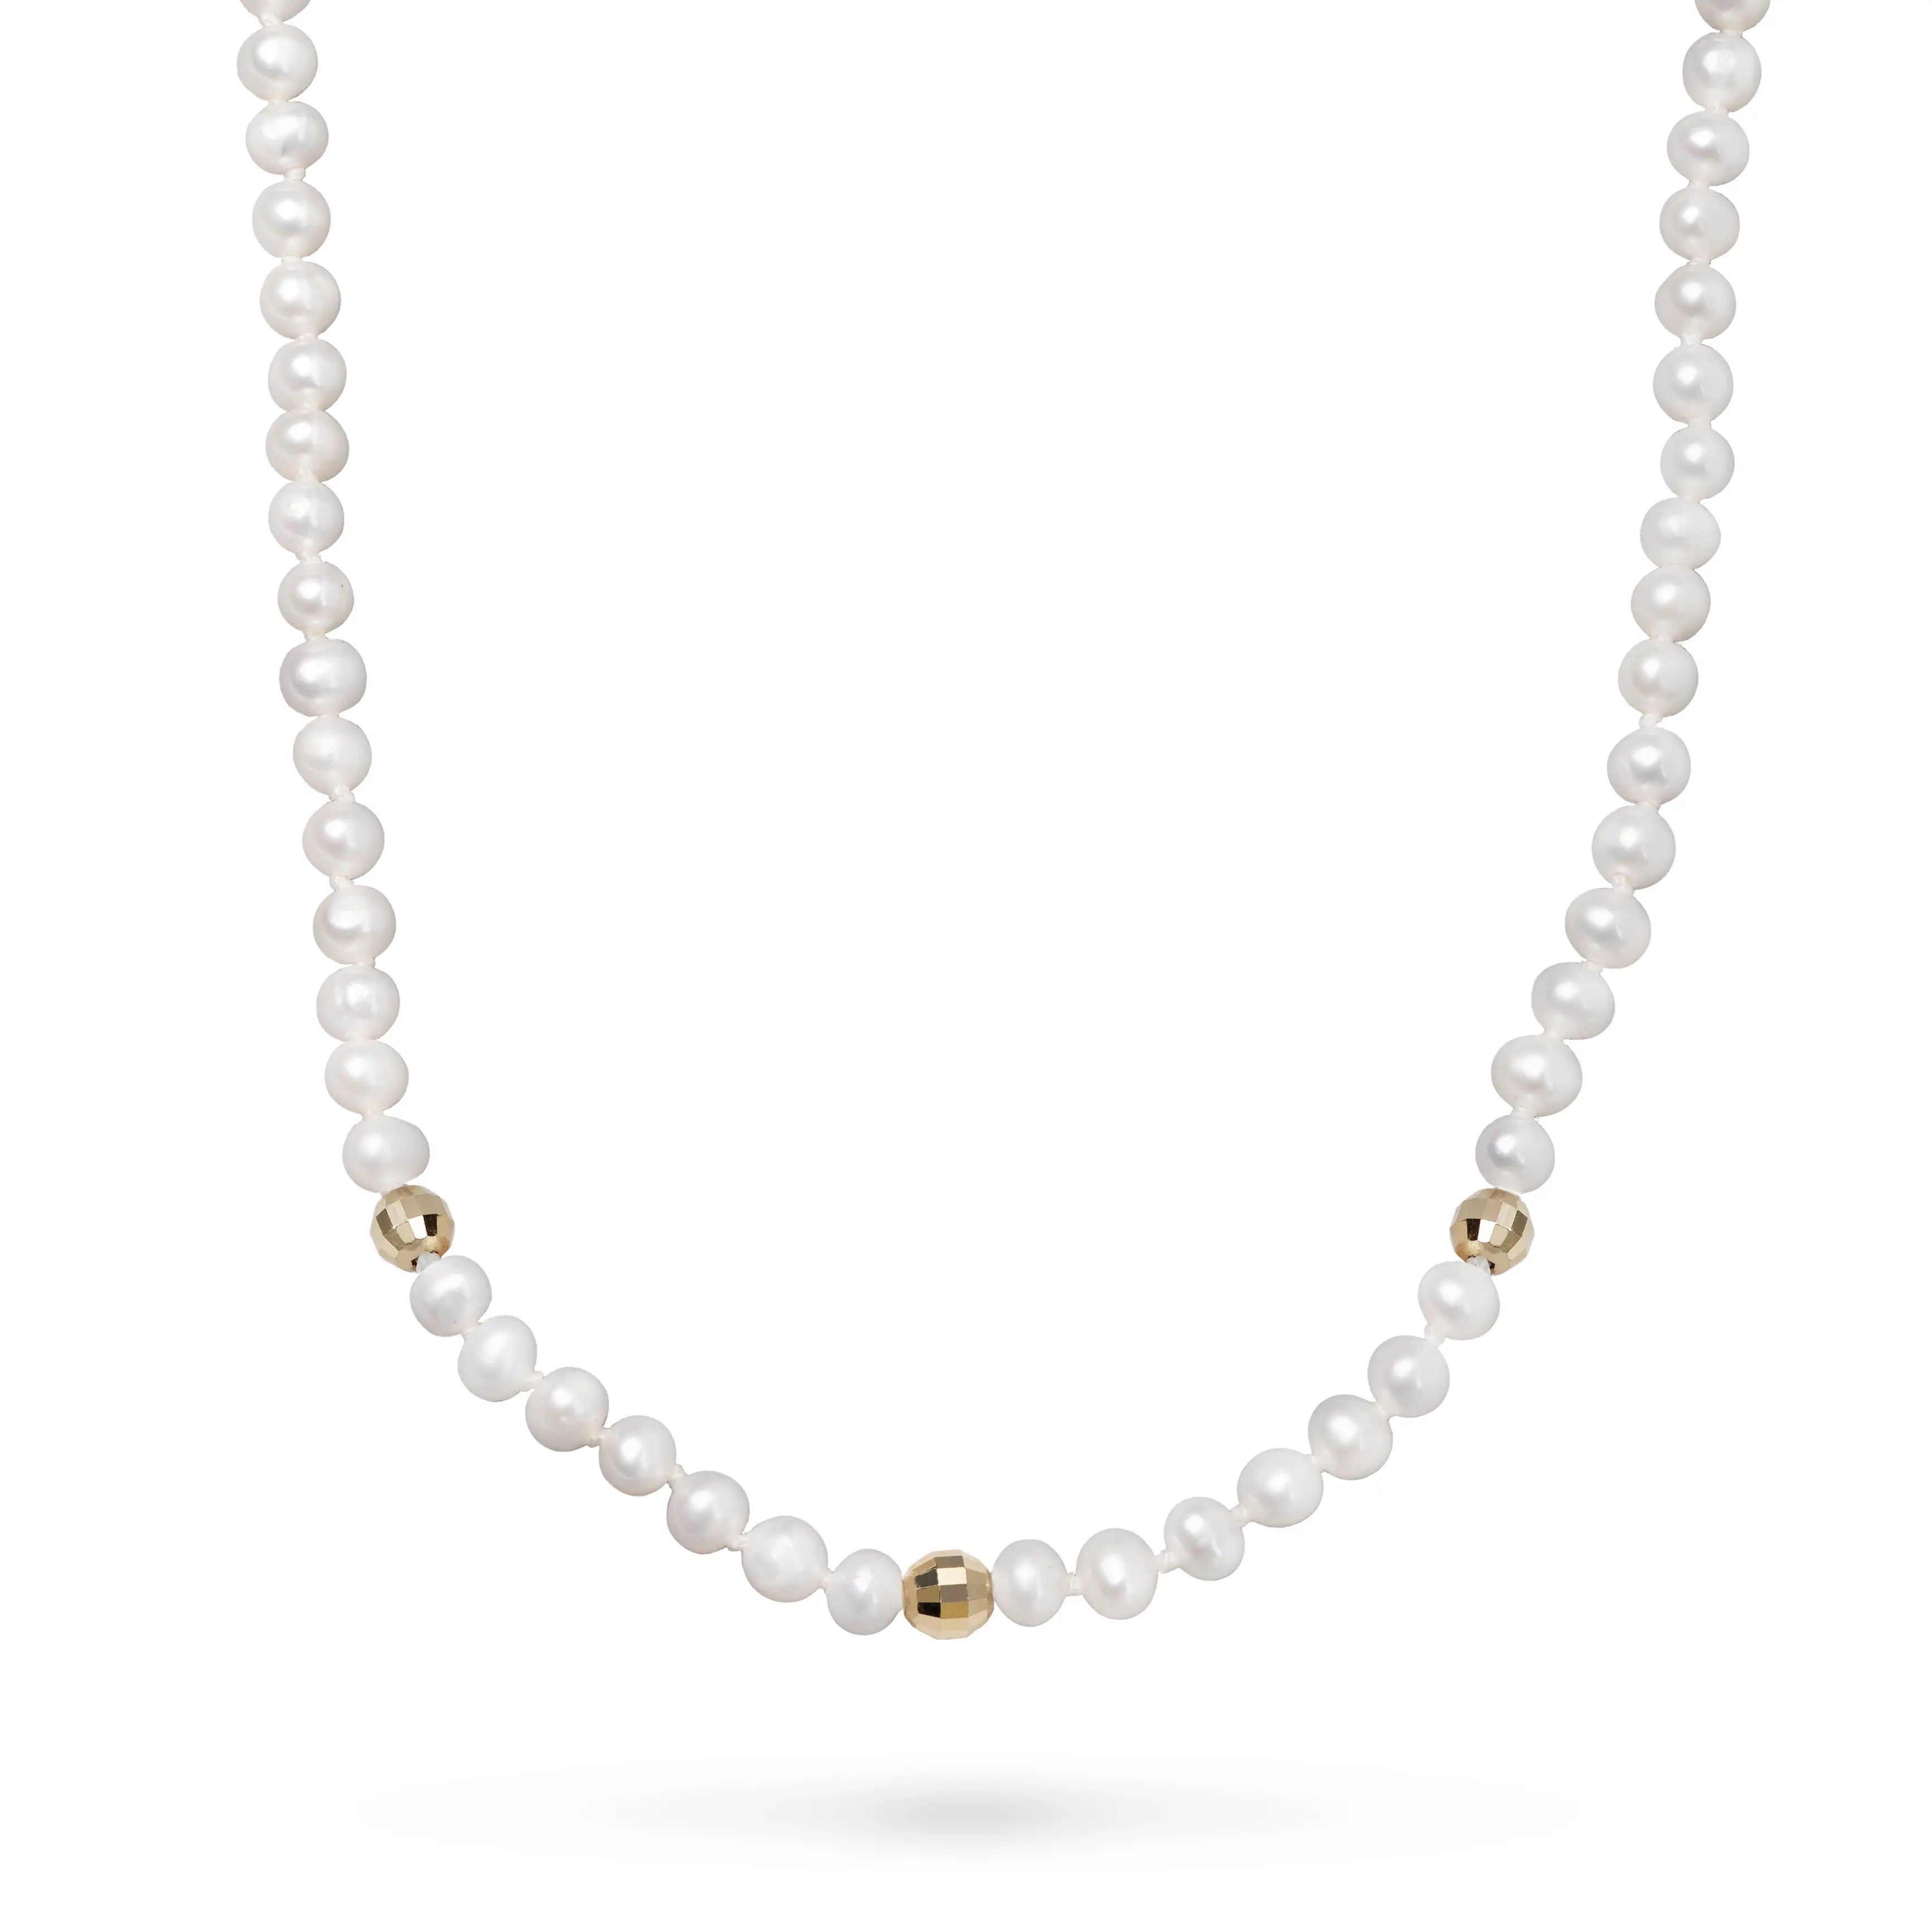 Pearl Necklace with 14K Gold Beads by Kyklos Jewelry